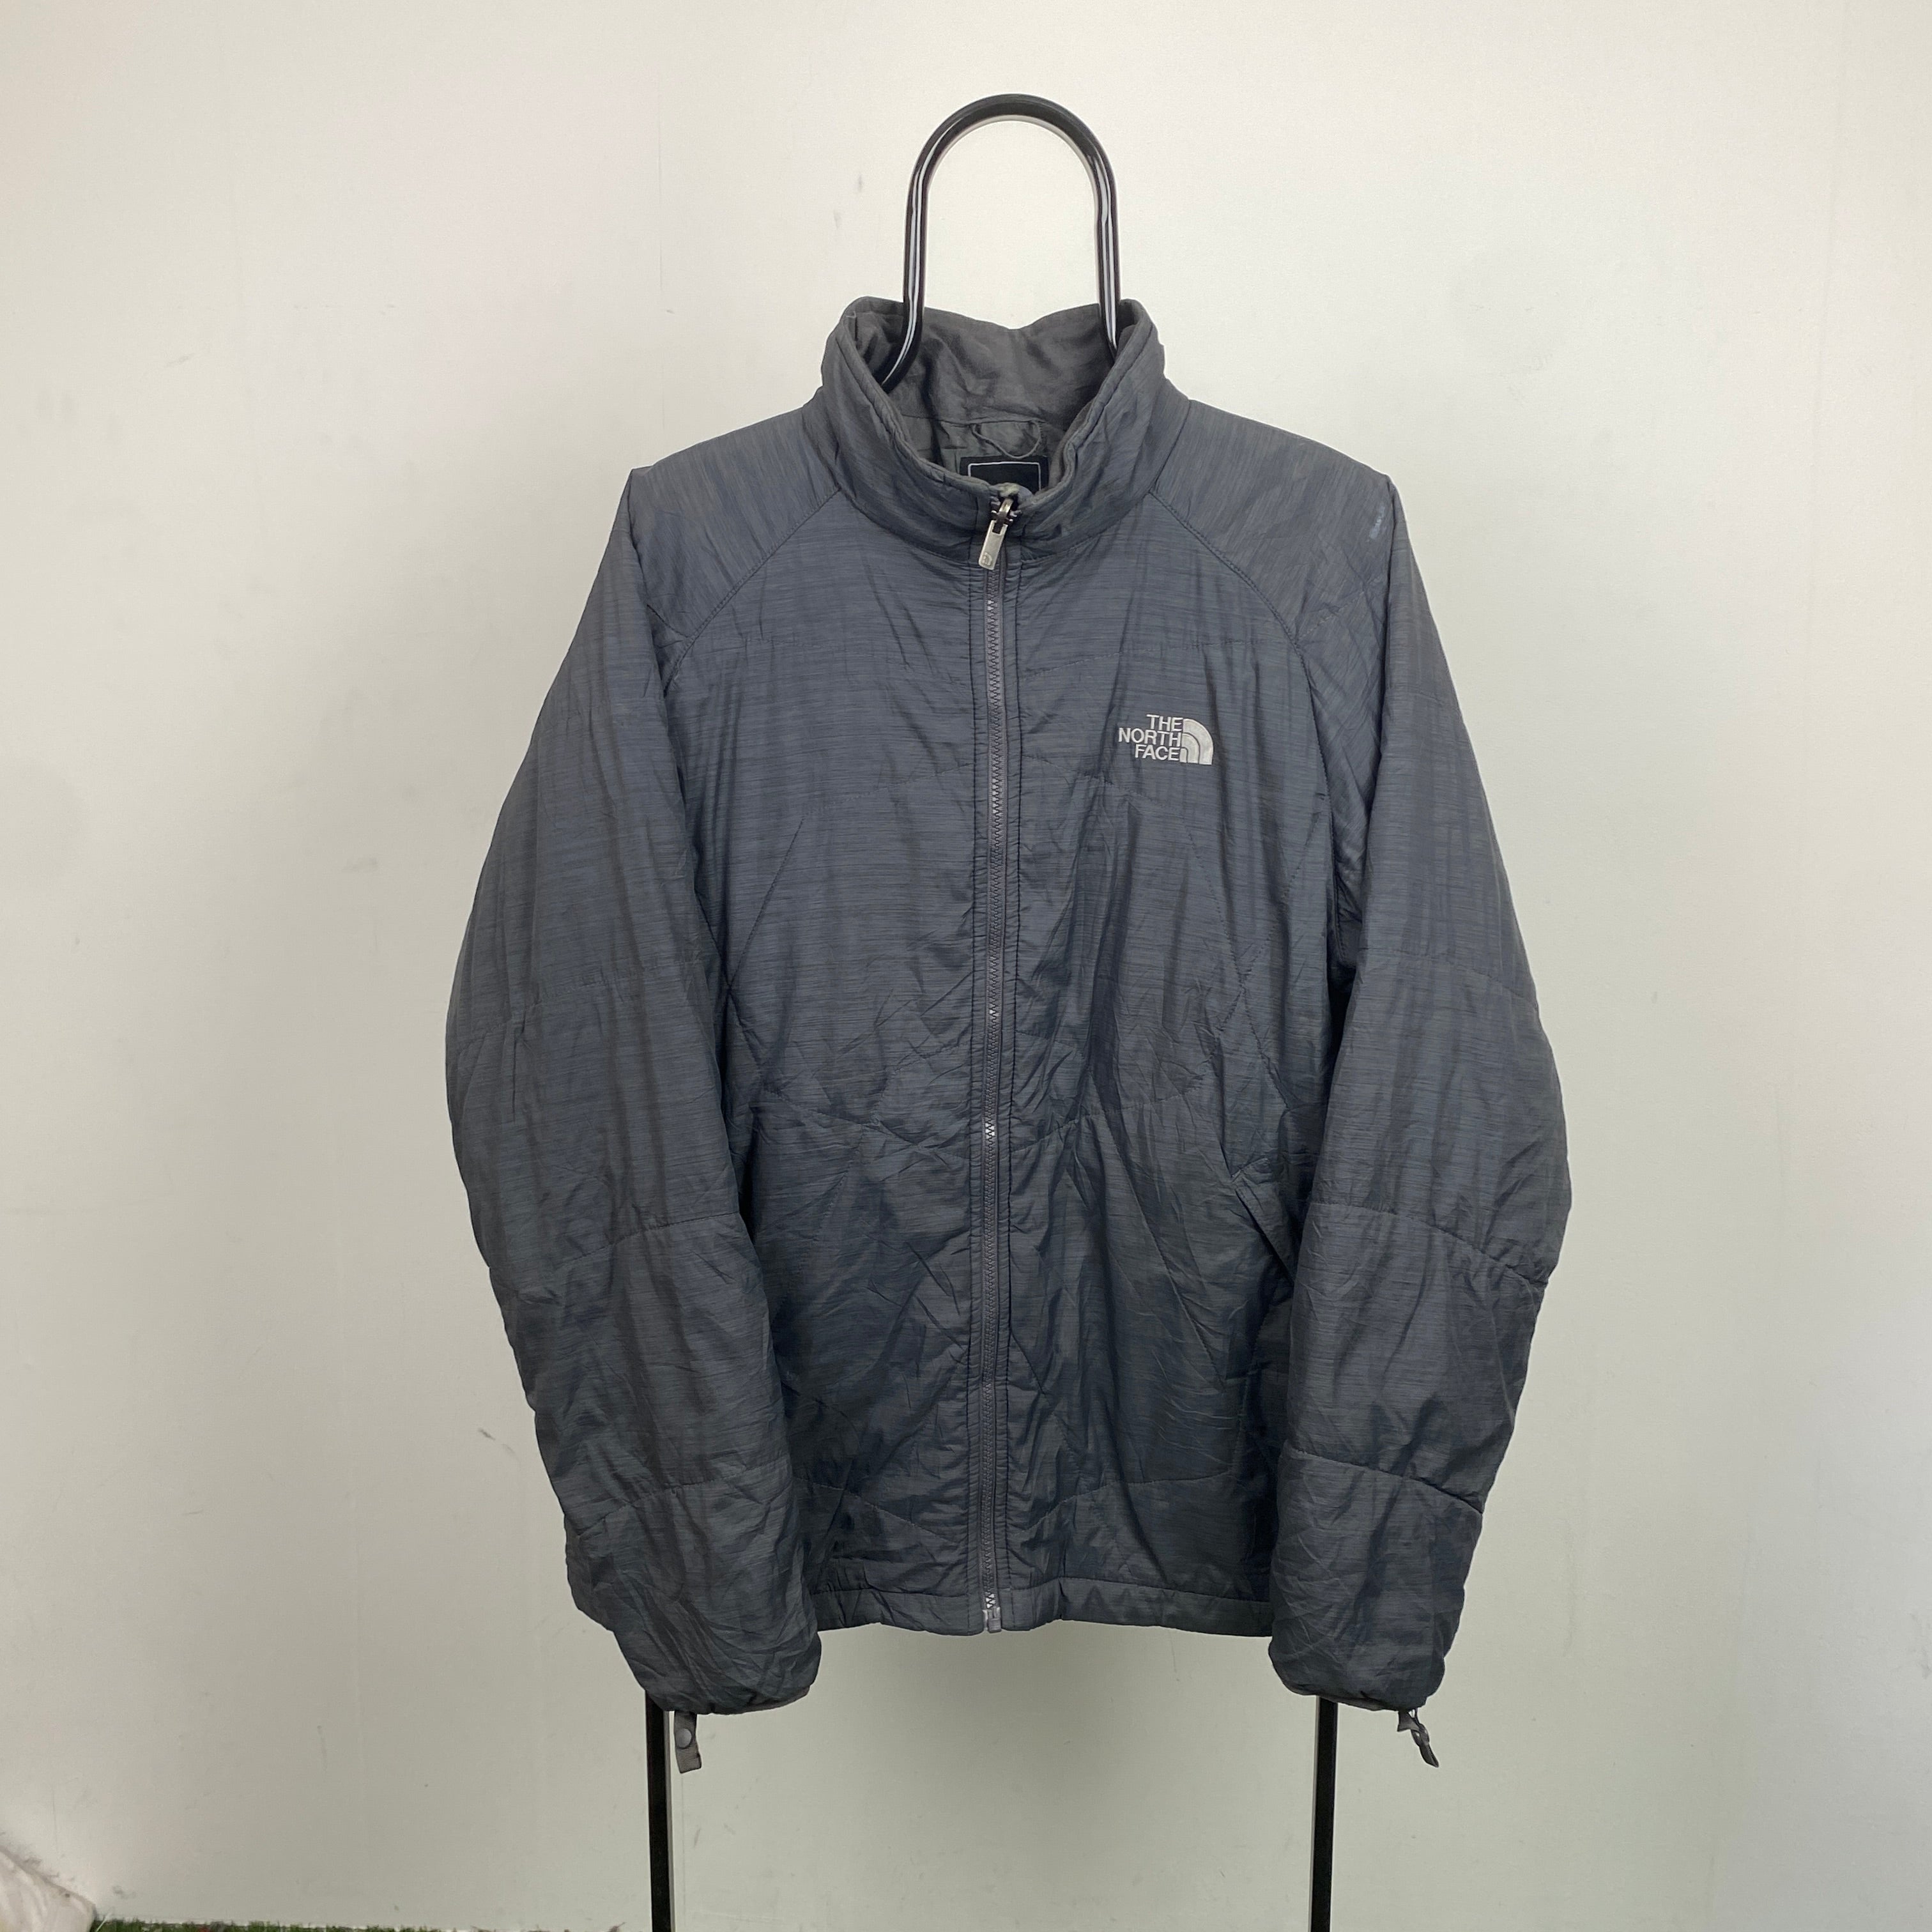 Retro The North Face Puffer Jacket Grey Large